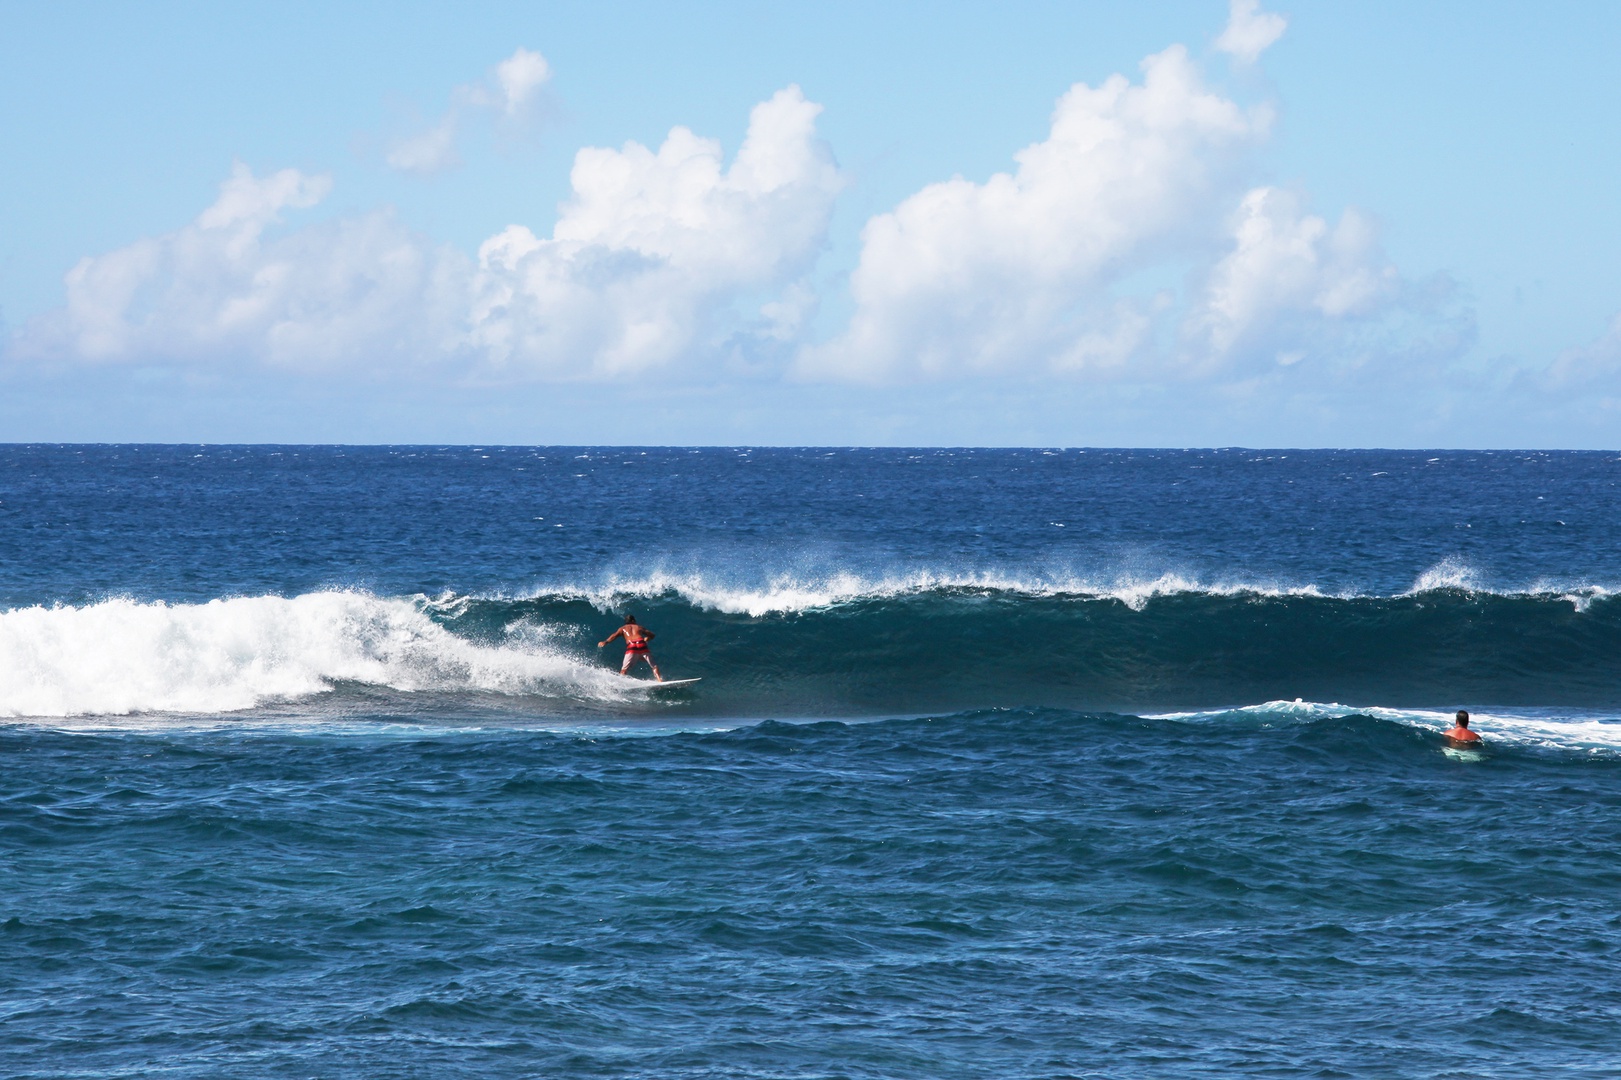 Koloa Vacation Rentals, Kukui'ula Villa #8 - World class surfing nearby for you to admire